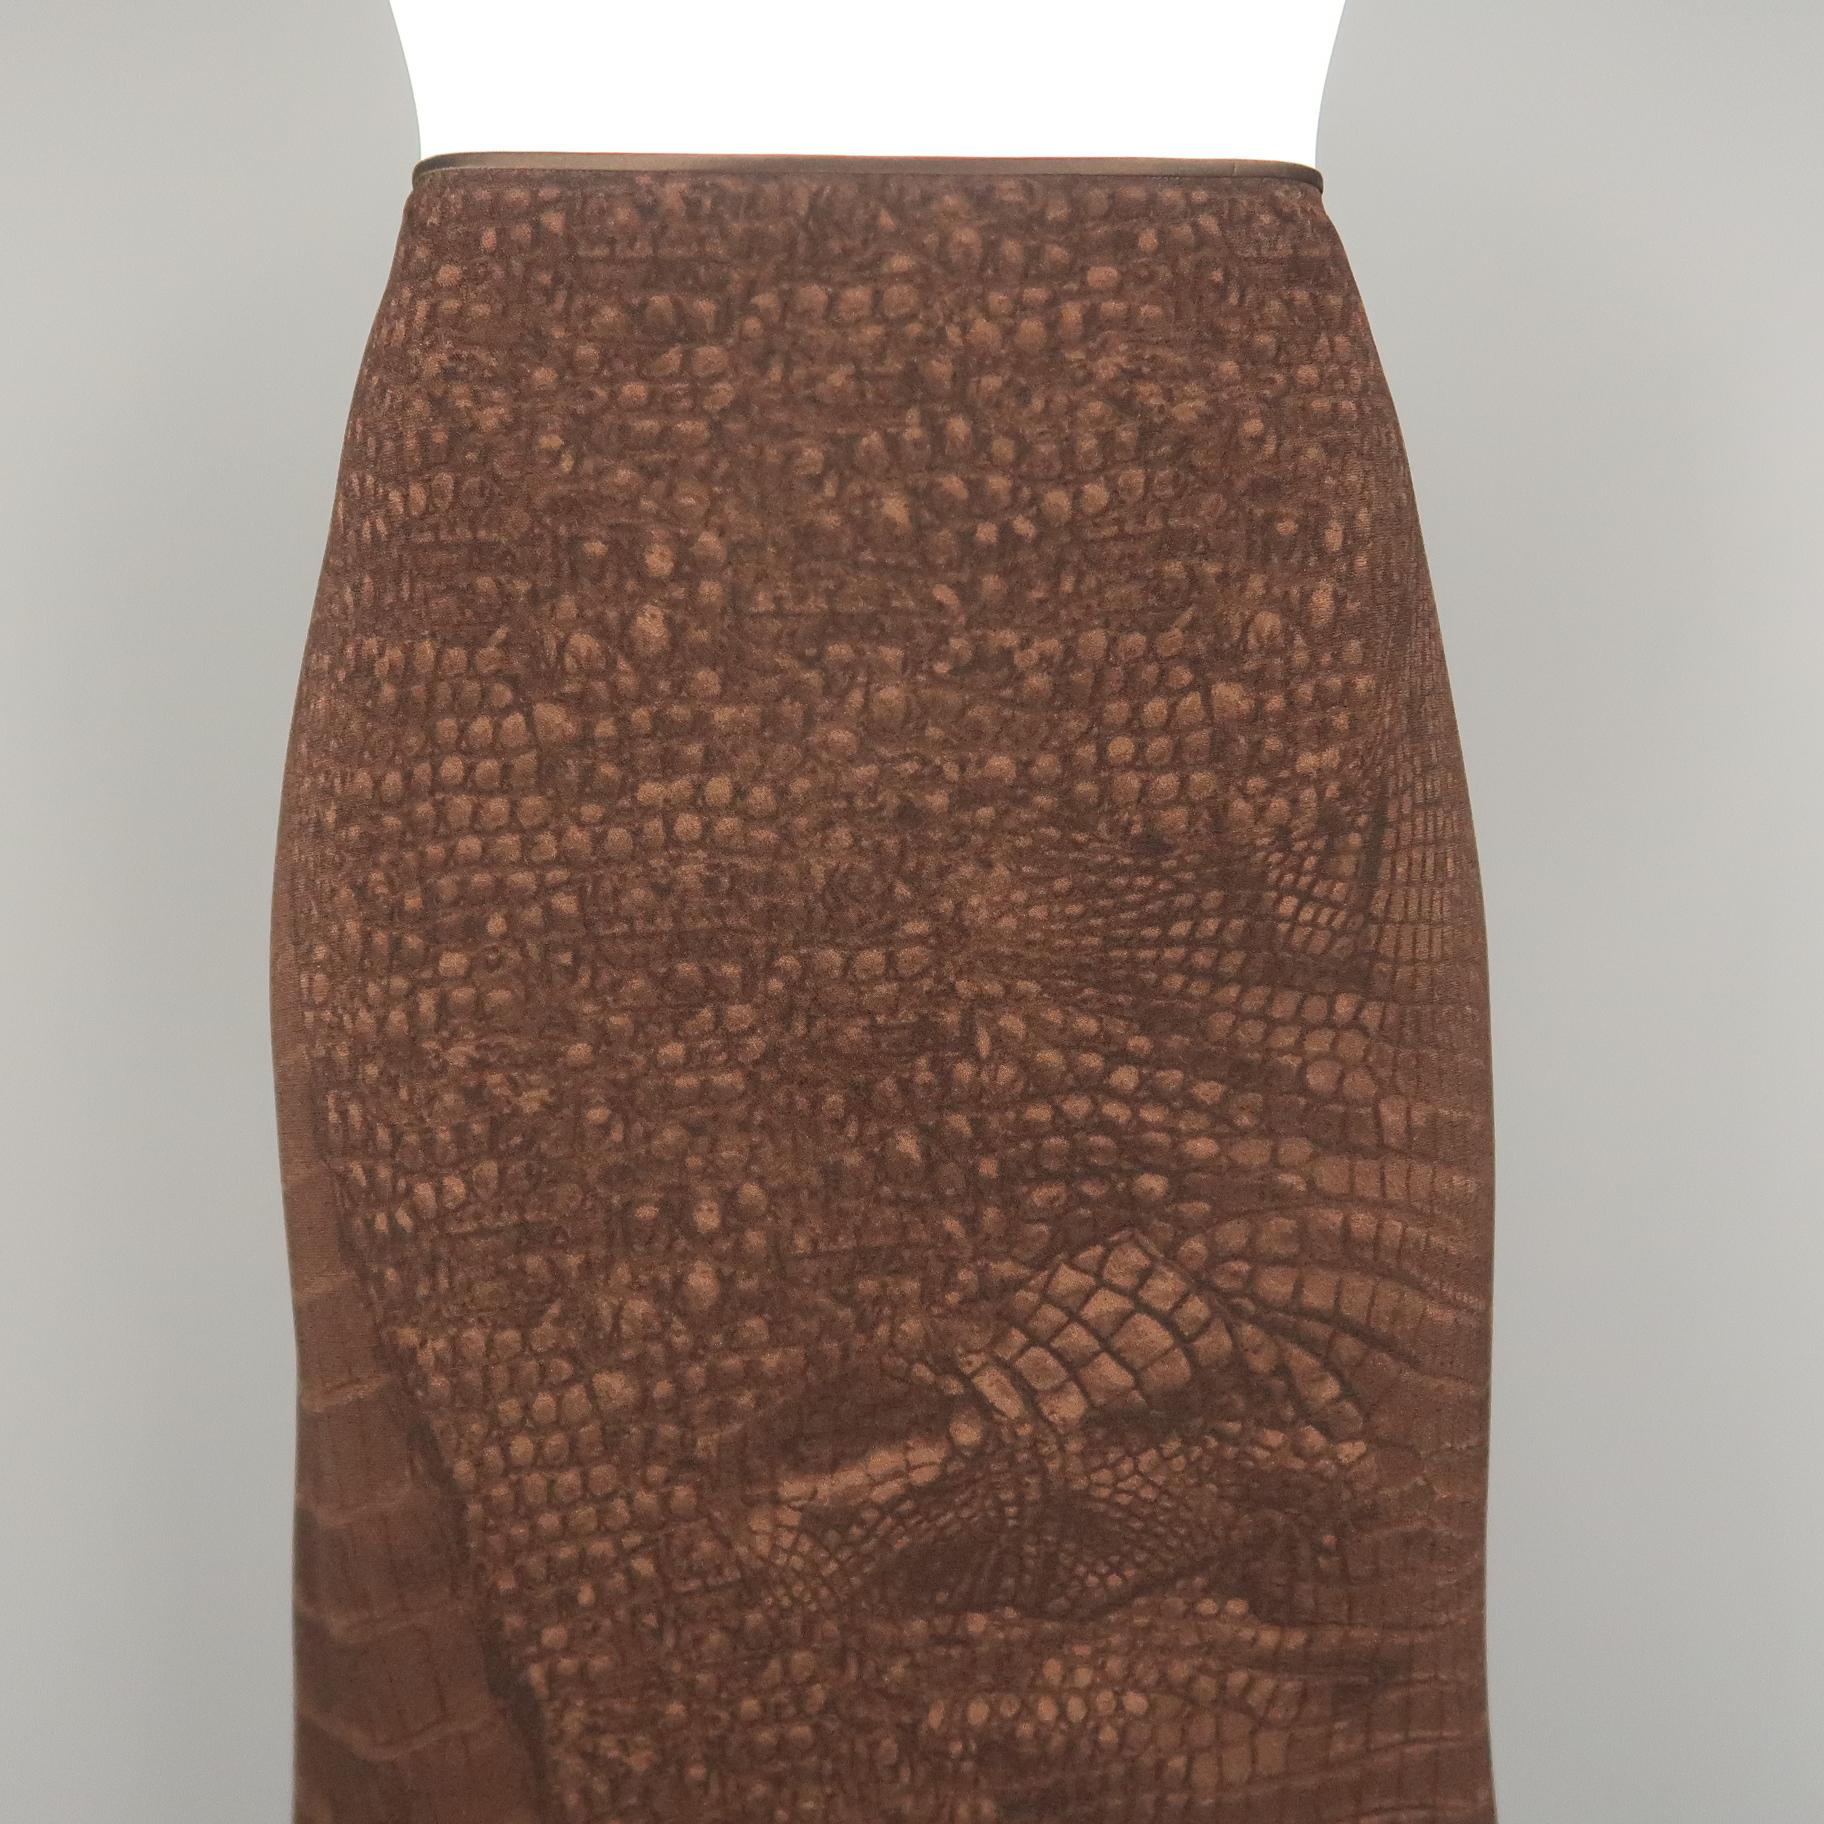 Archive JOHN GALLIANO A line maxi skirt comes in brown alligator print crepe with a satin waist piping trim, A line silhouette, and multi button side closure. Made in France.
 
Excellent Pre-Owned Condition.
Marked: 10
 
Measurements:
 
Waist: 30